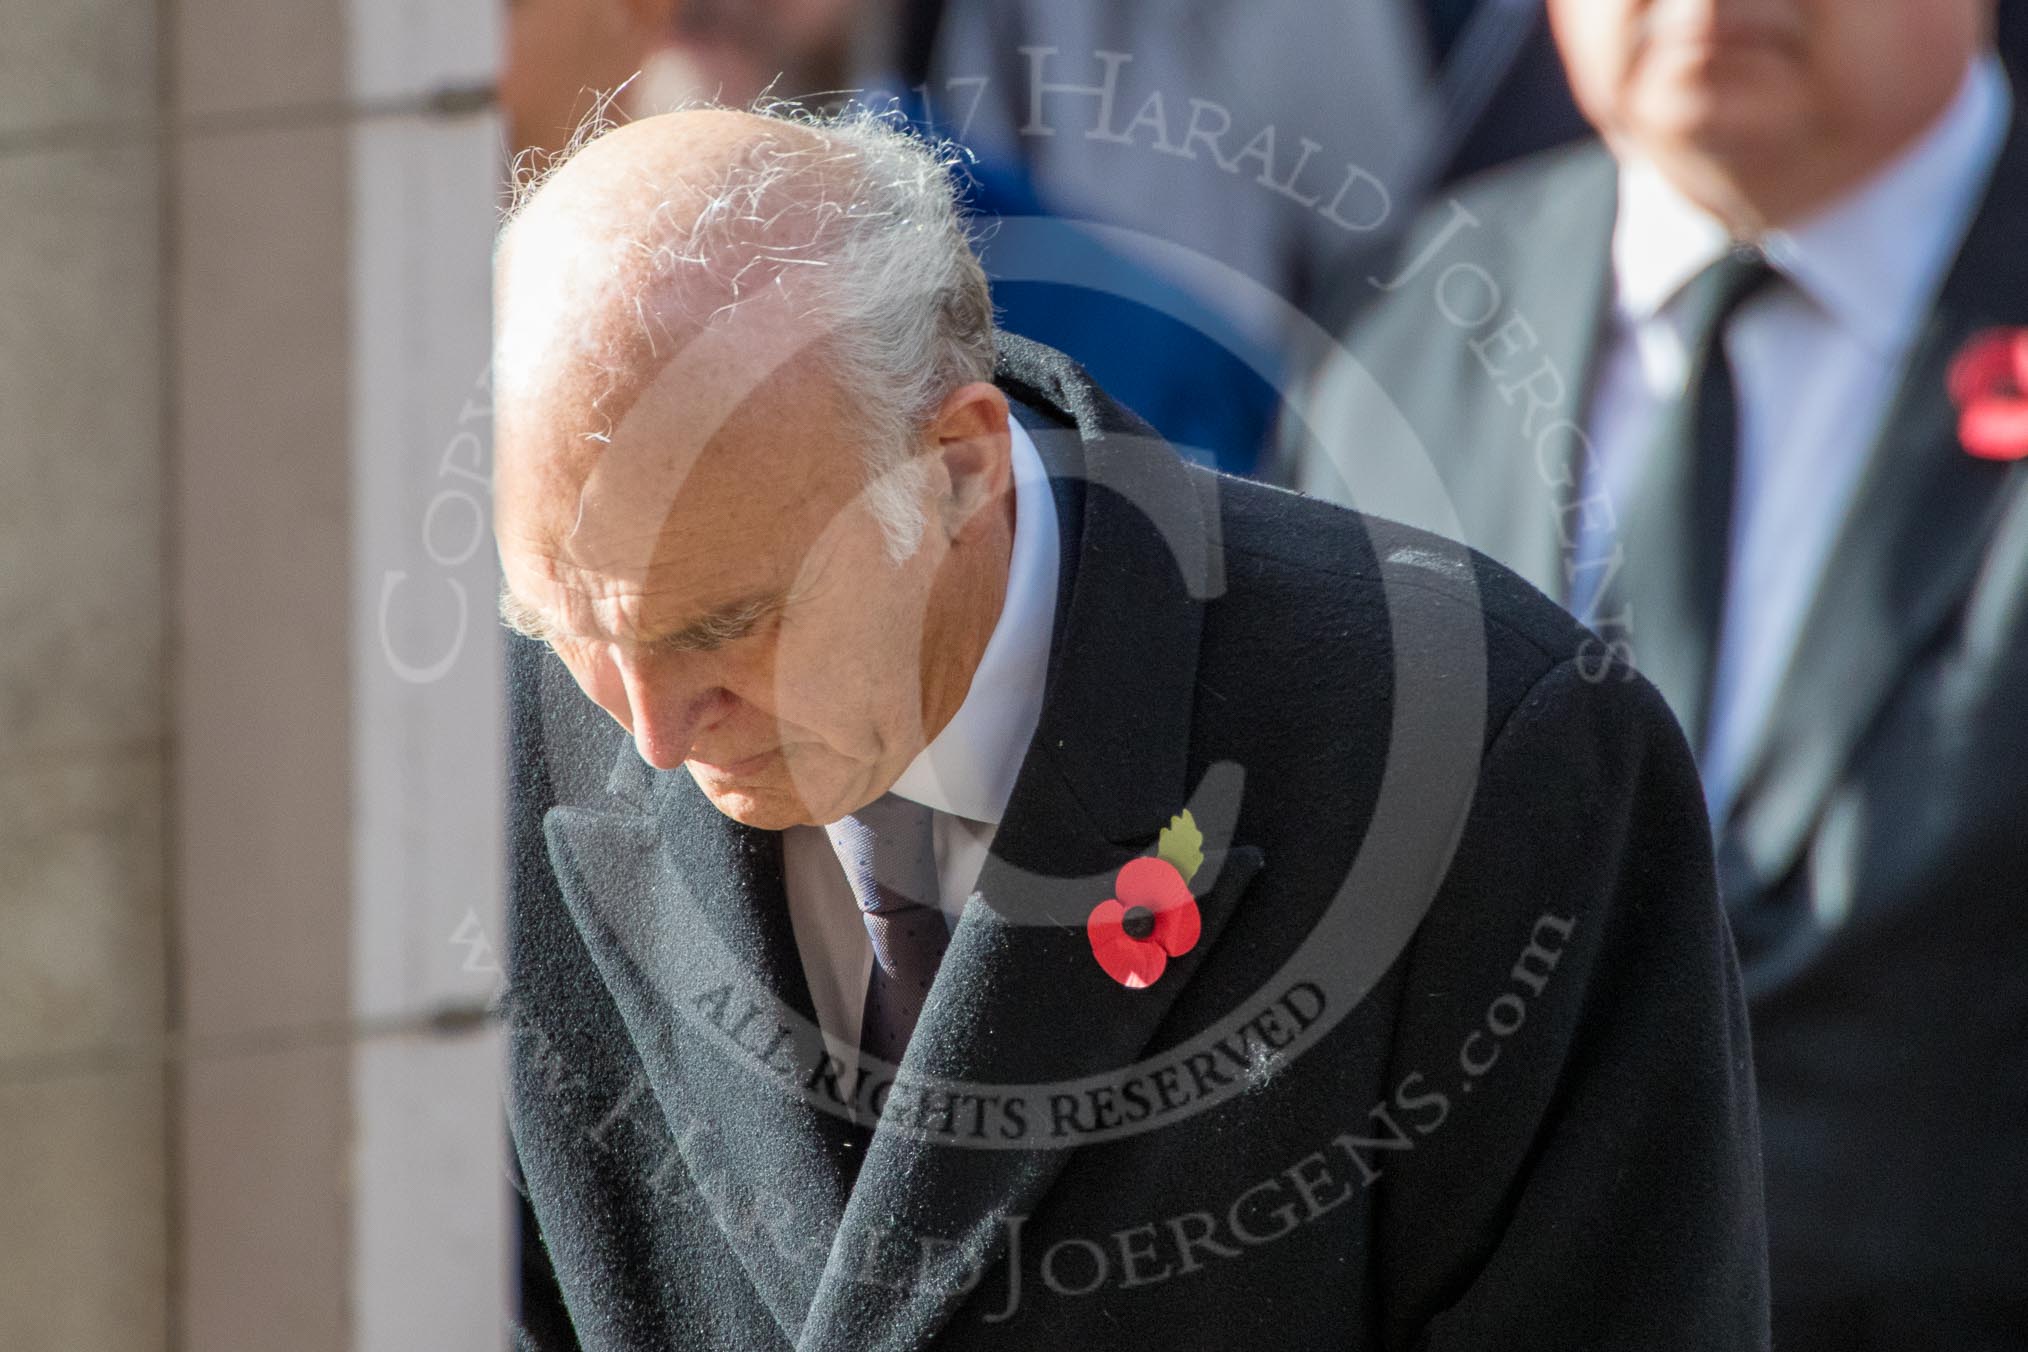 The Rt Hon Vince Cable MP (Leader of the Liberal Democrats) during the Remembrance Sunday Cenotaph Ceremony 2018 at Horse Guards Parade, Westminster, London, 11 November 2018, 11:09.